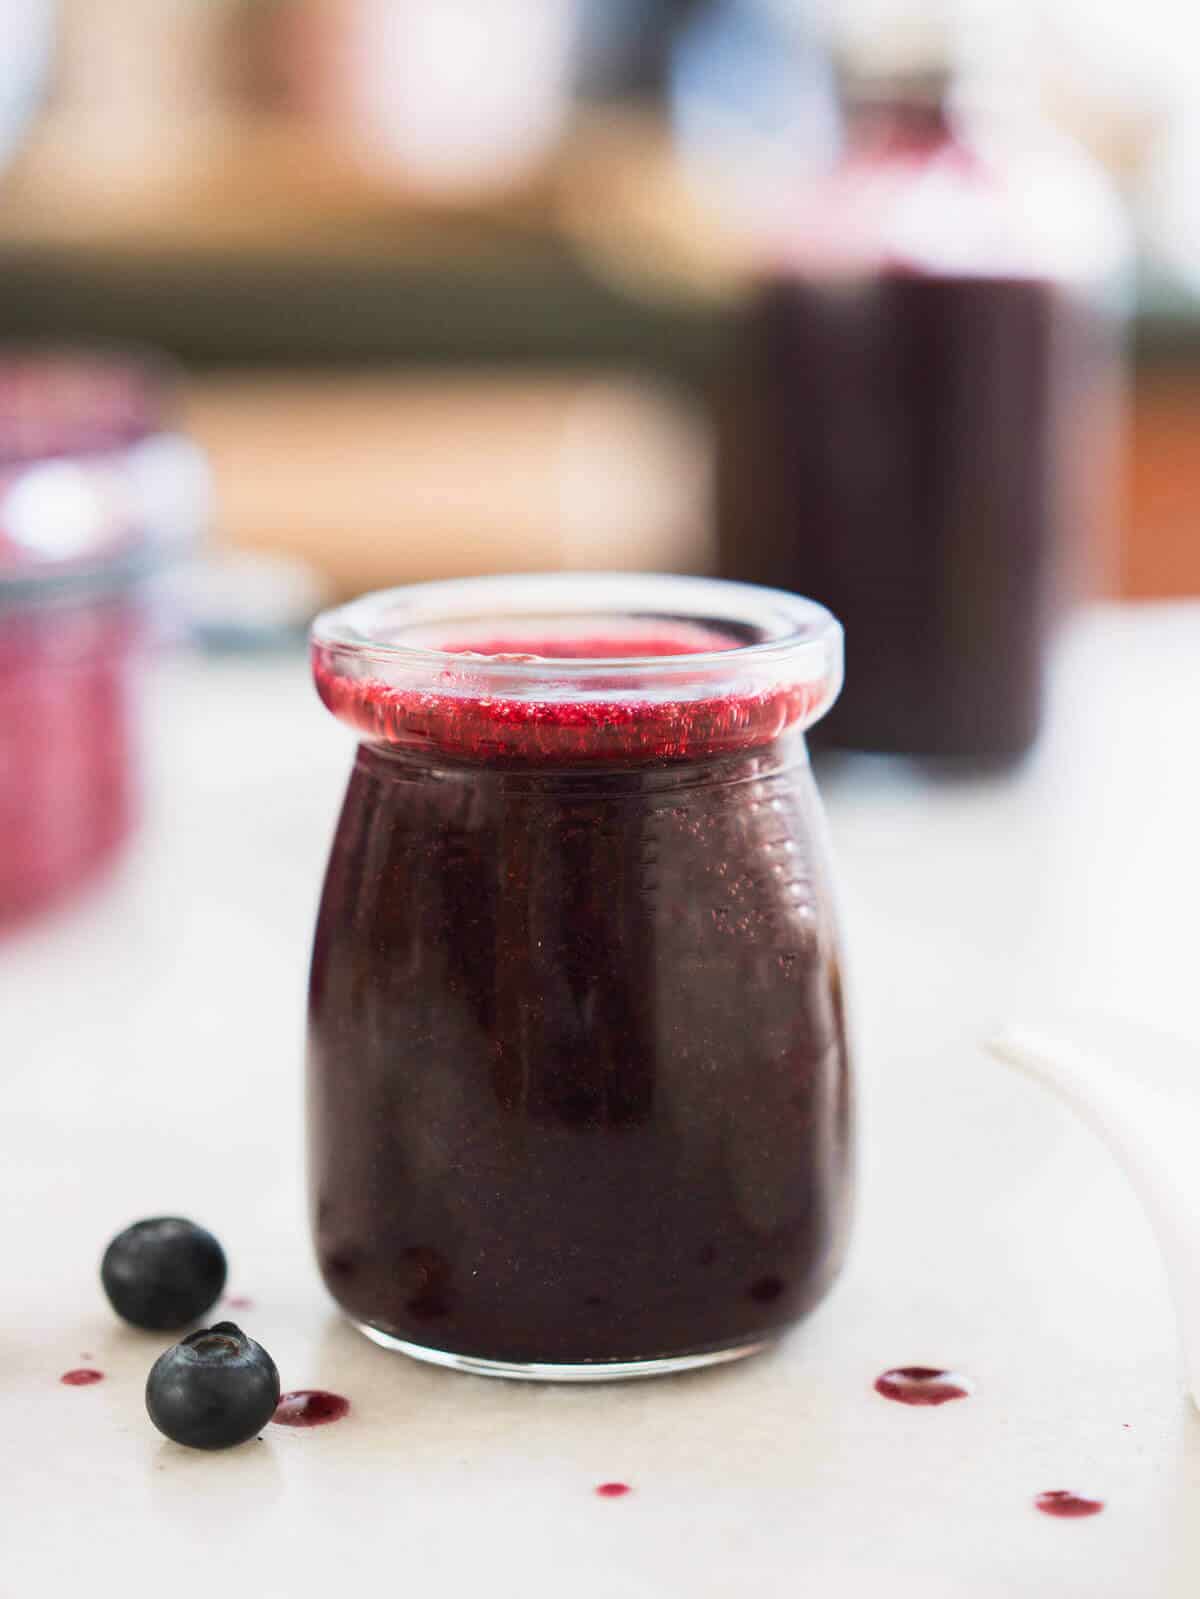 balsamic blueberry salad dressing in a small glass bottle.